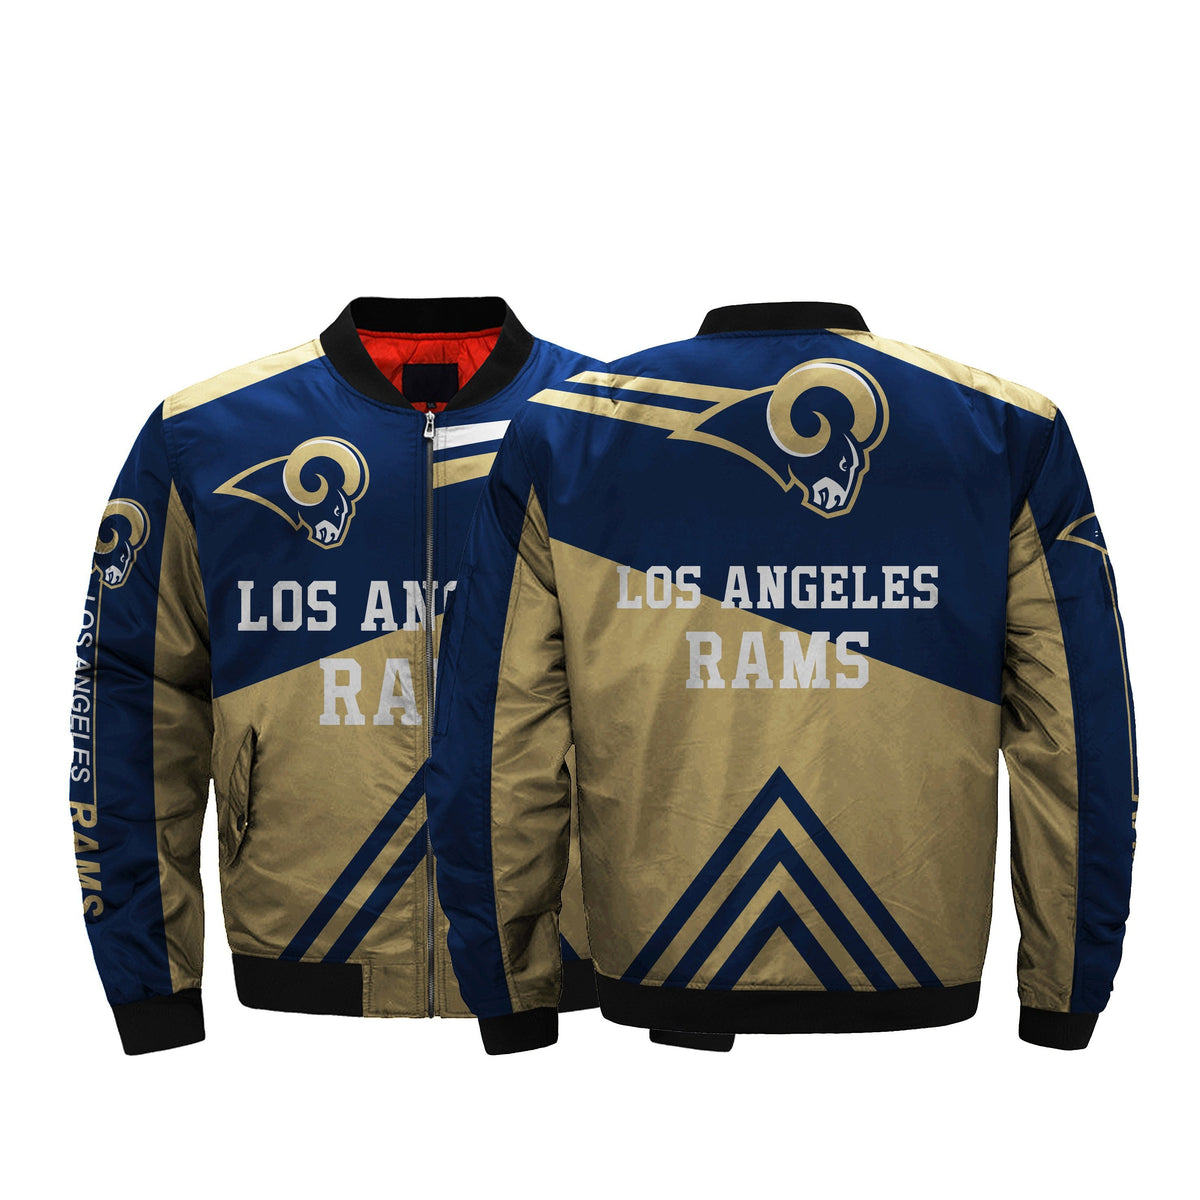 Low Price NFL Jackets 3D Los Angeles Rams Bomber Jacket For Men